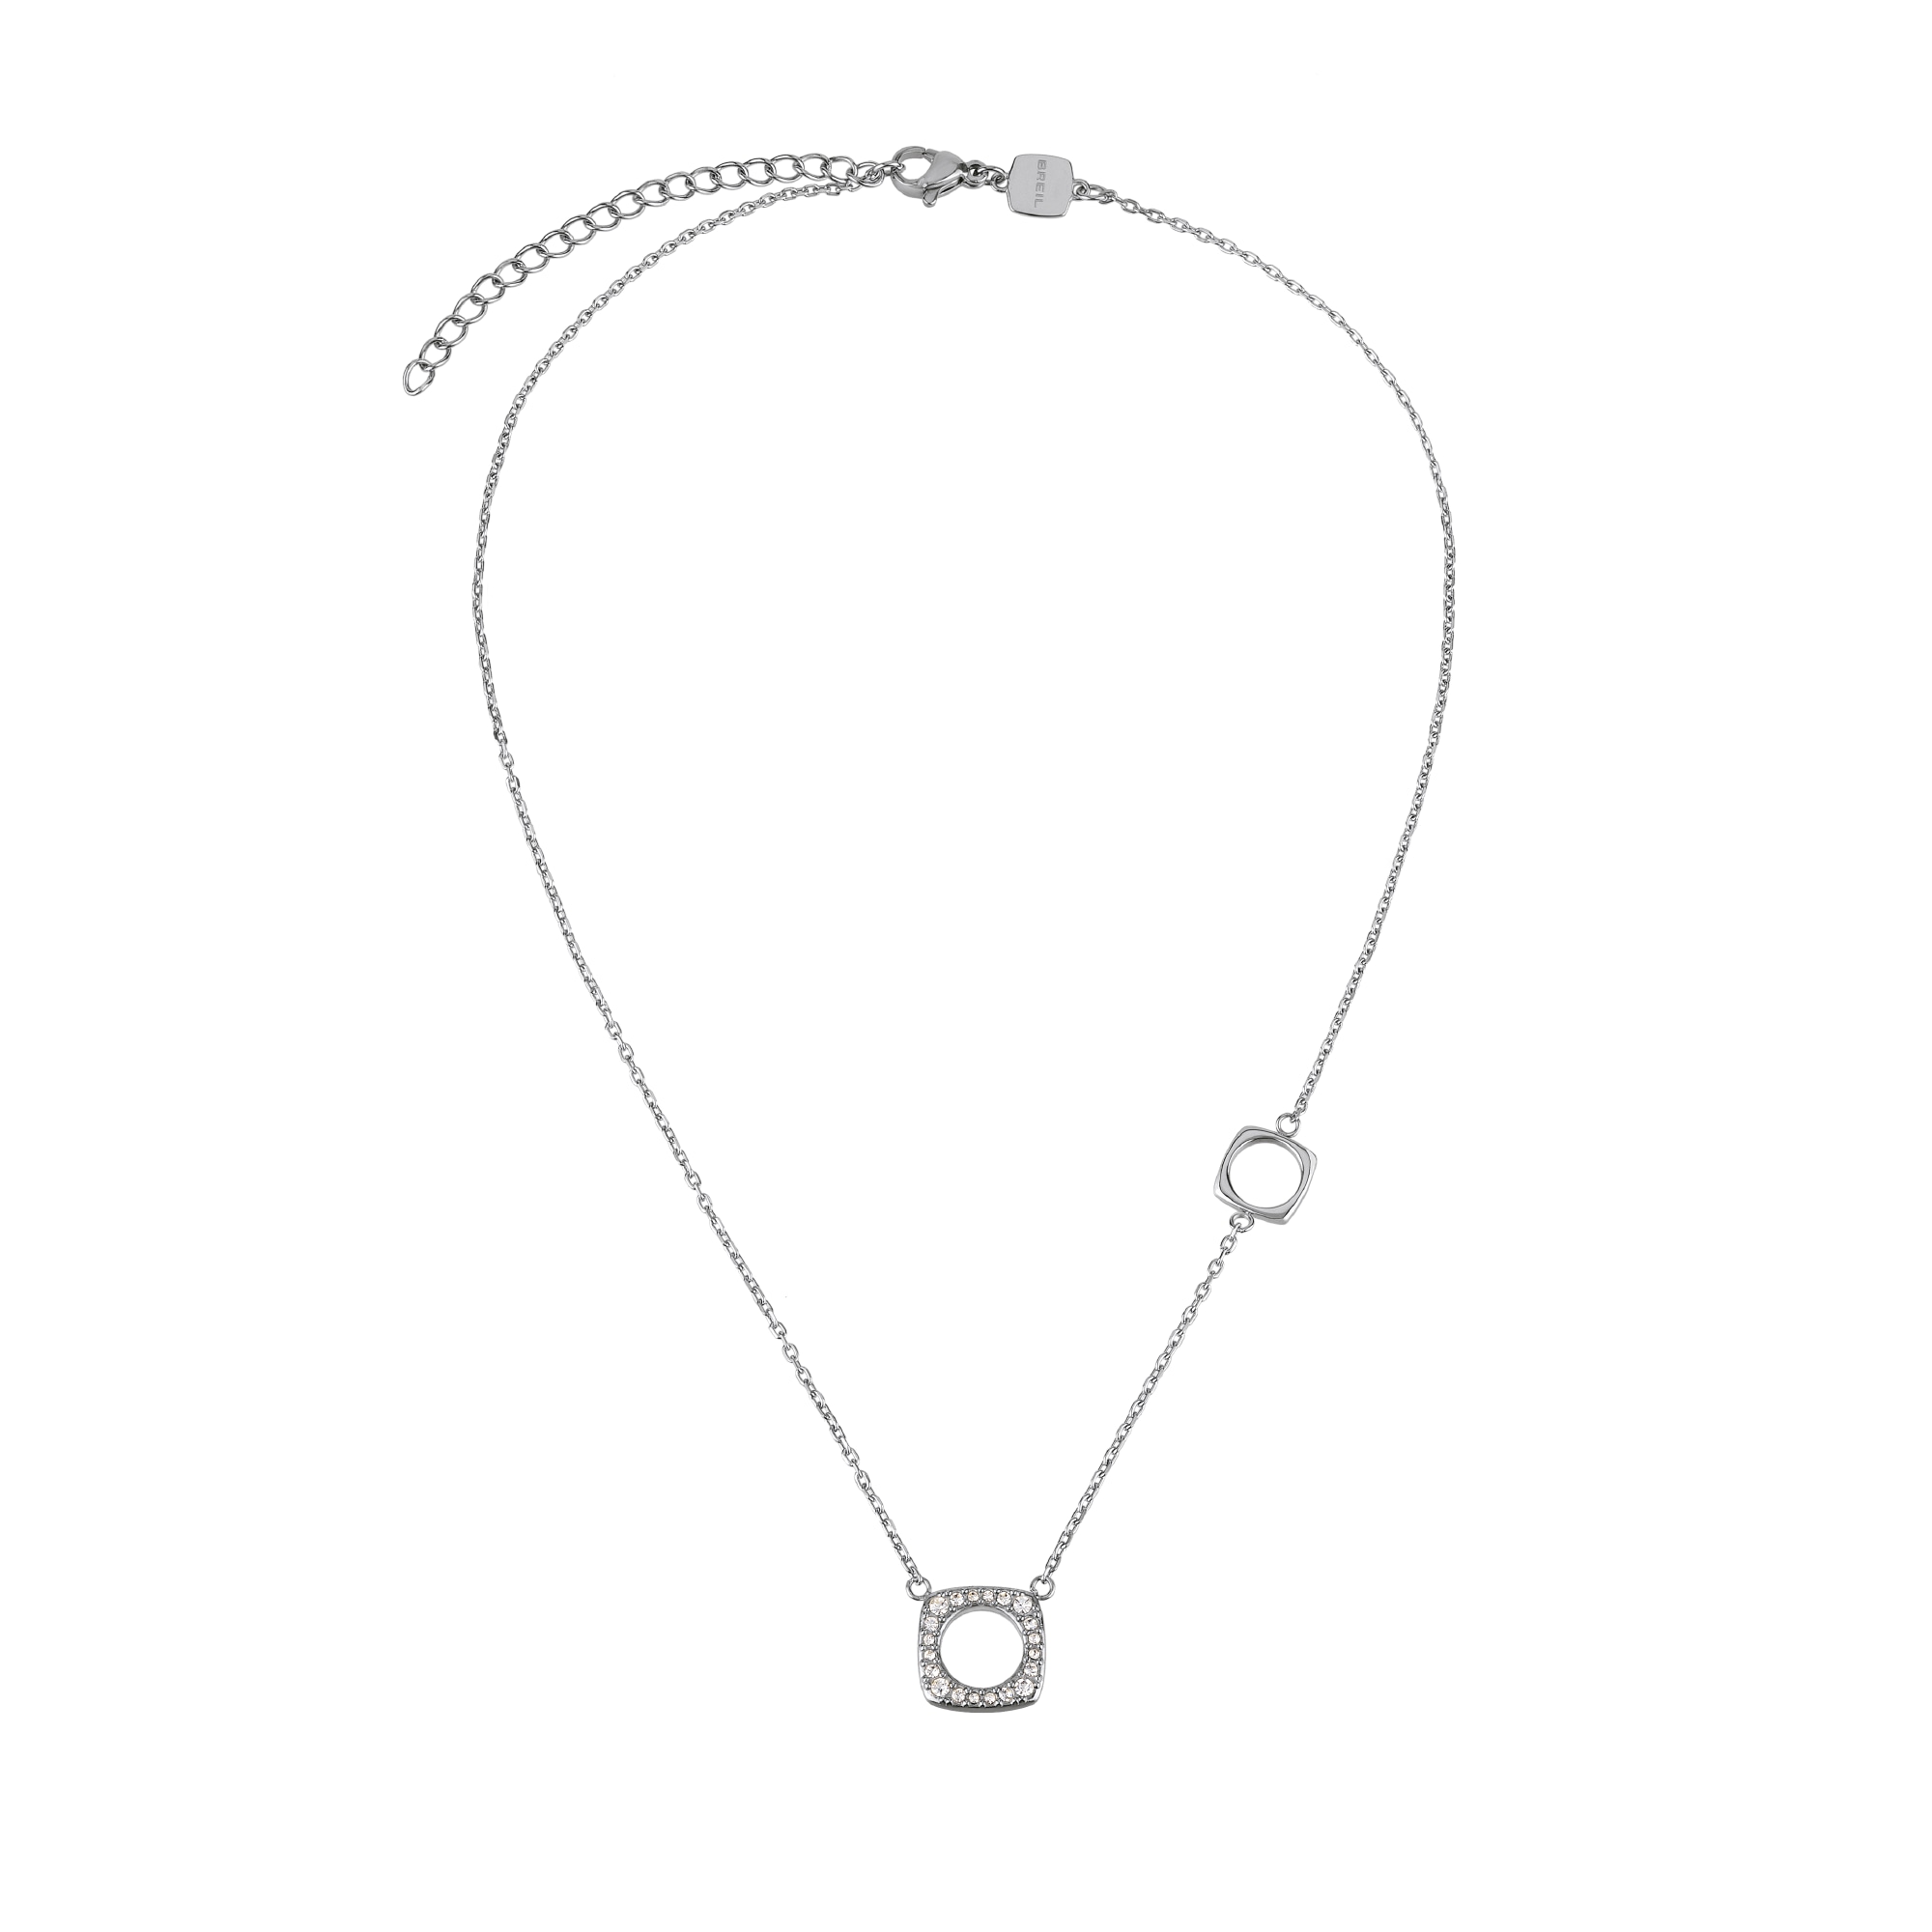 NEW TETRA - SET OF 2 STAINLESS STEEL NECKLACES - 3 - TJ3169 | Breil